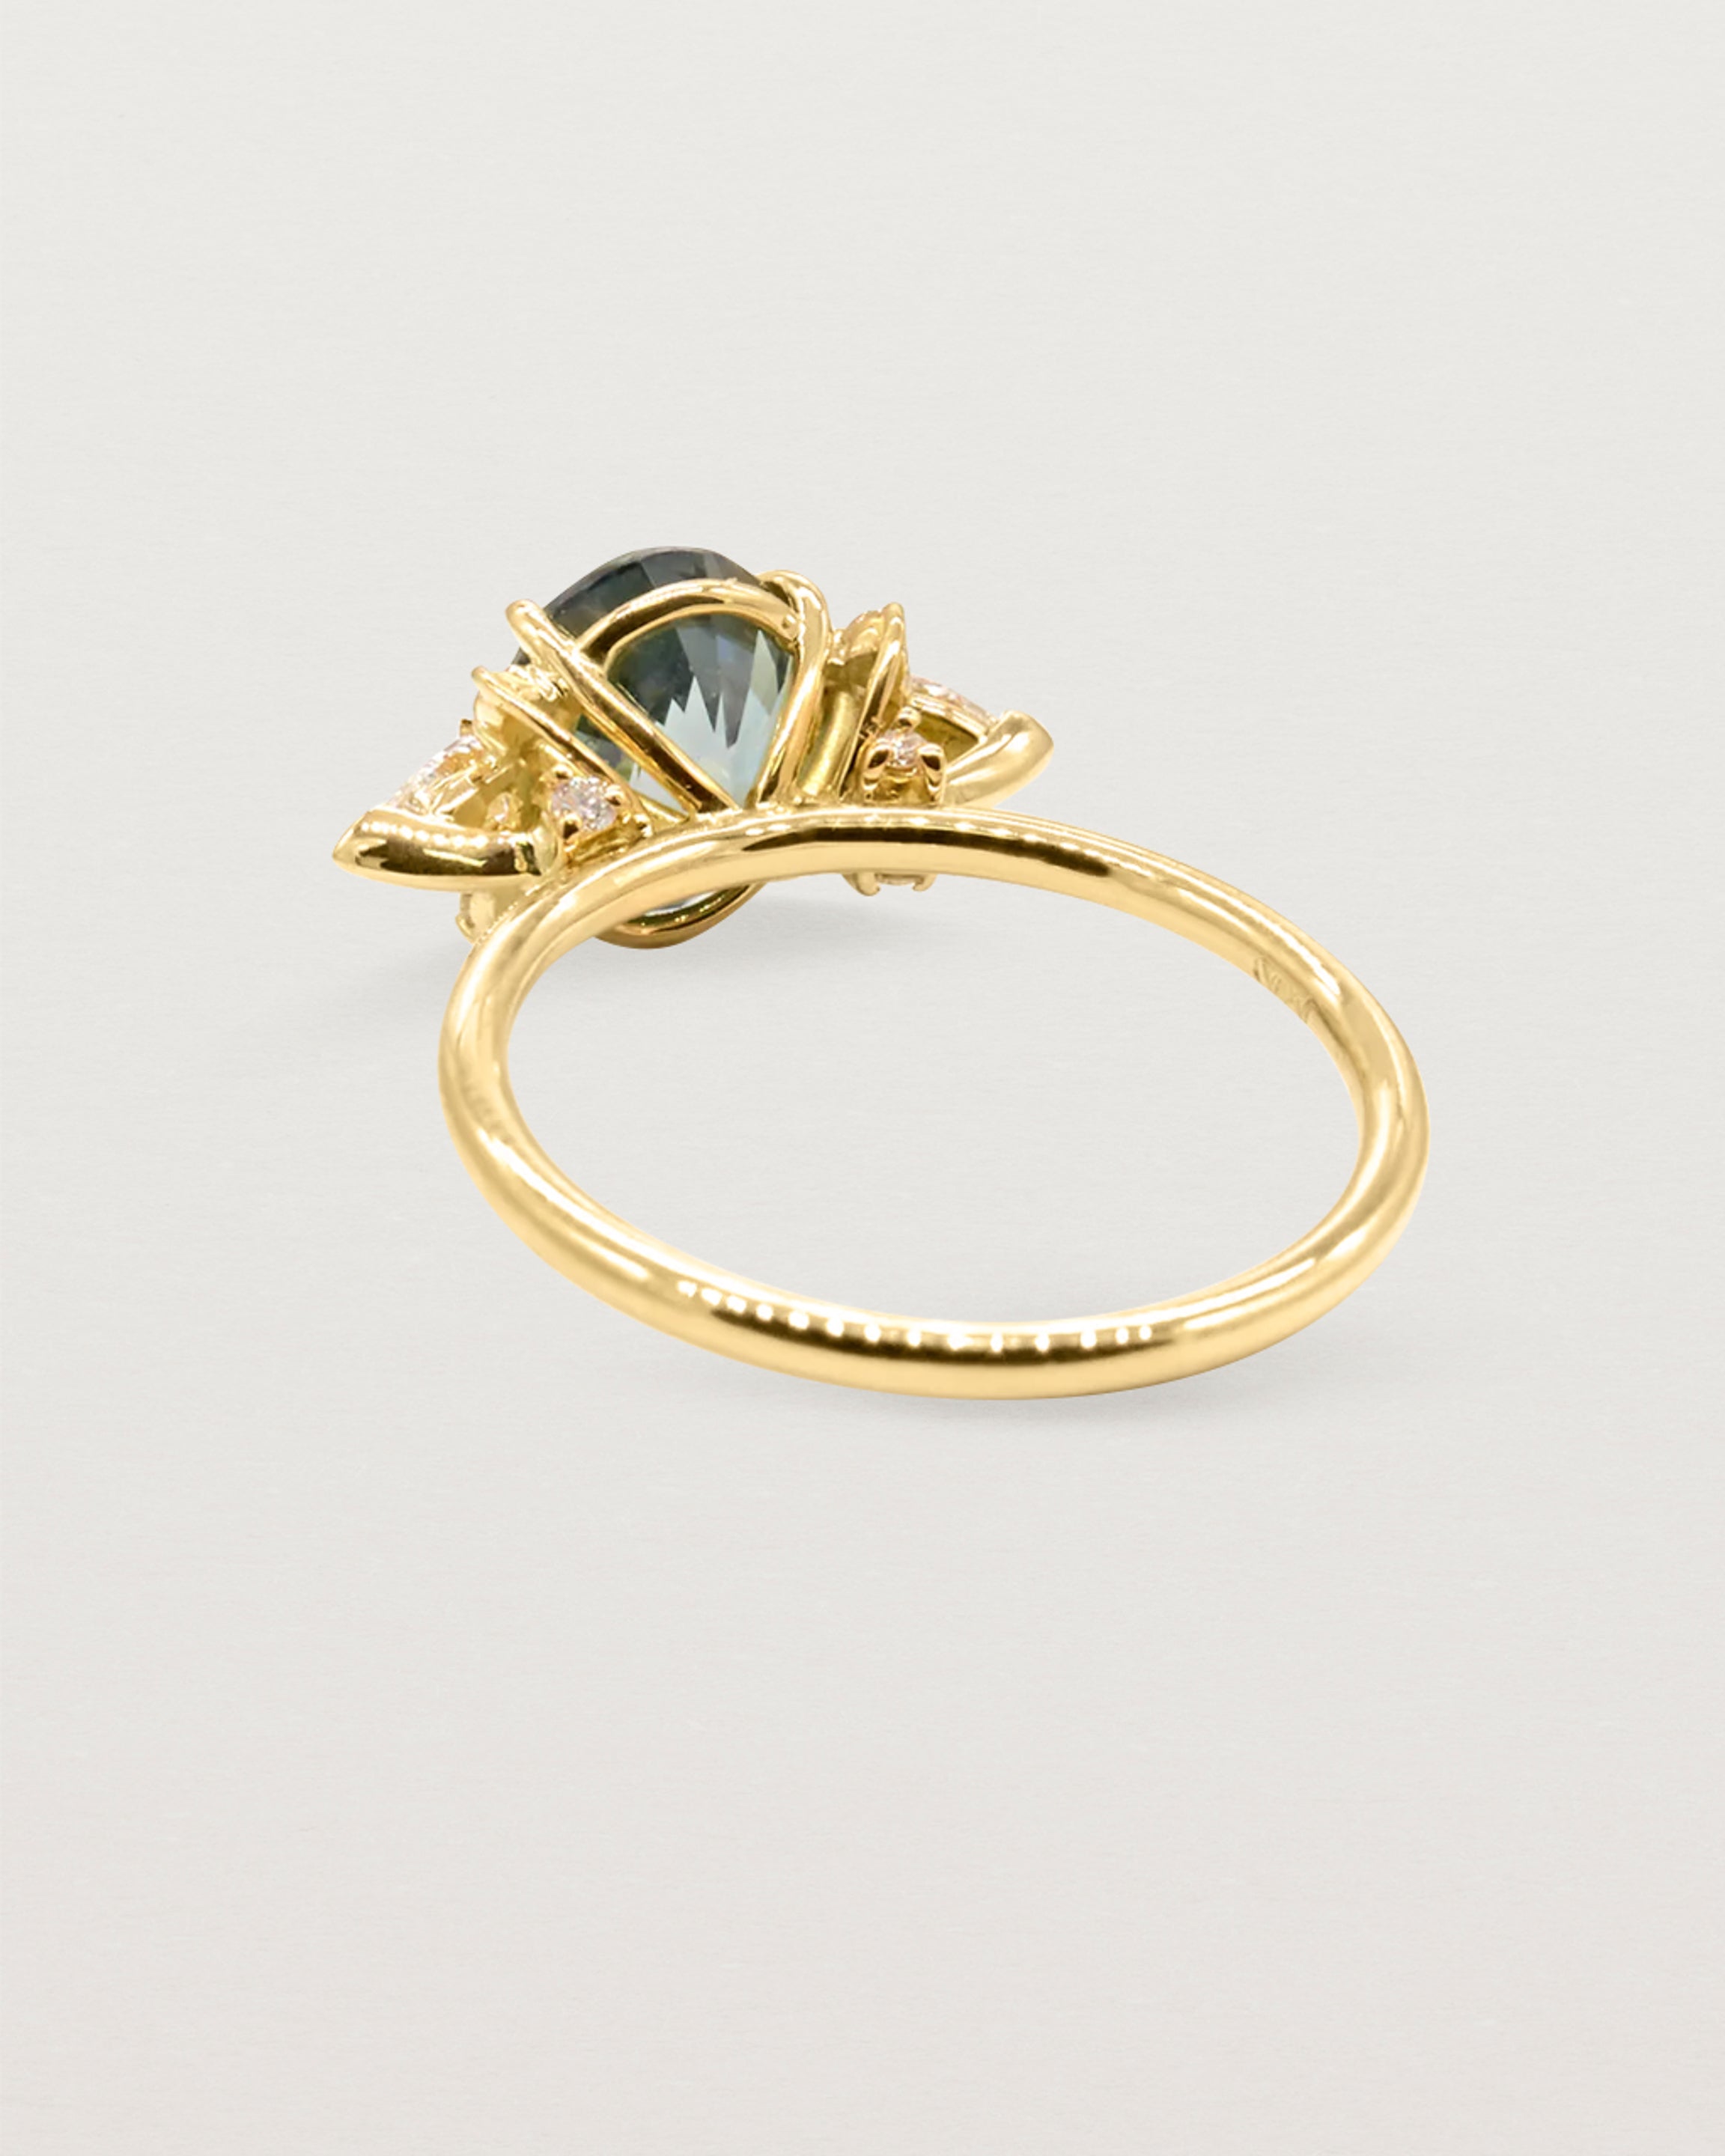 Back view of a  large oval teal sapphire adorned with white diamond clusters, crafted in yellow gold